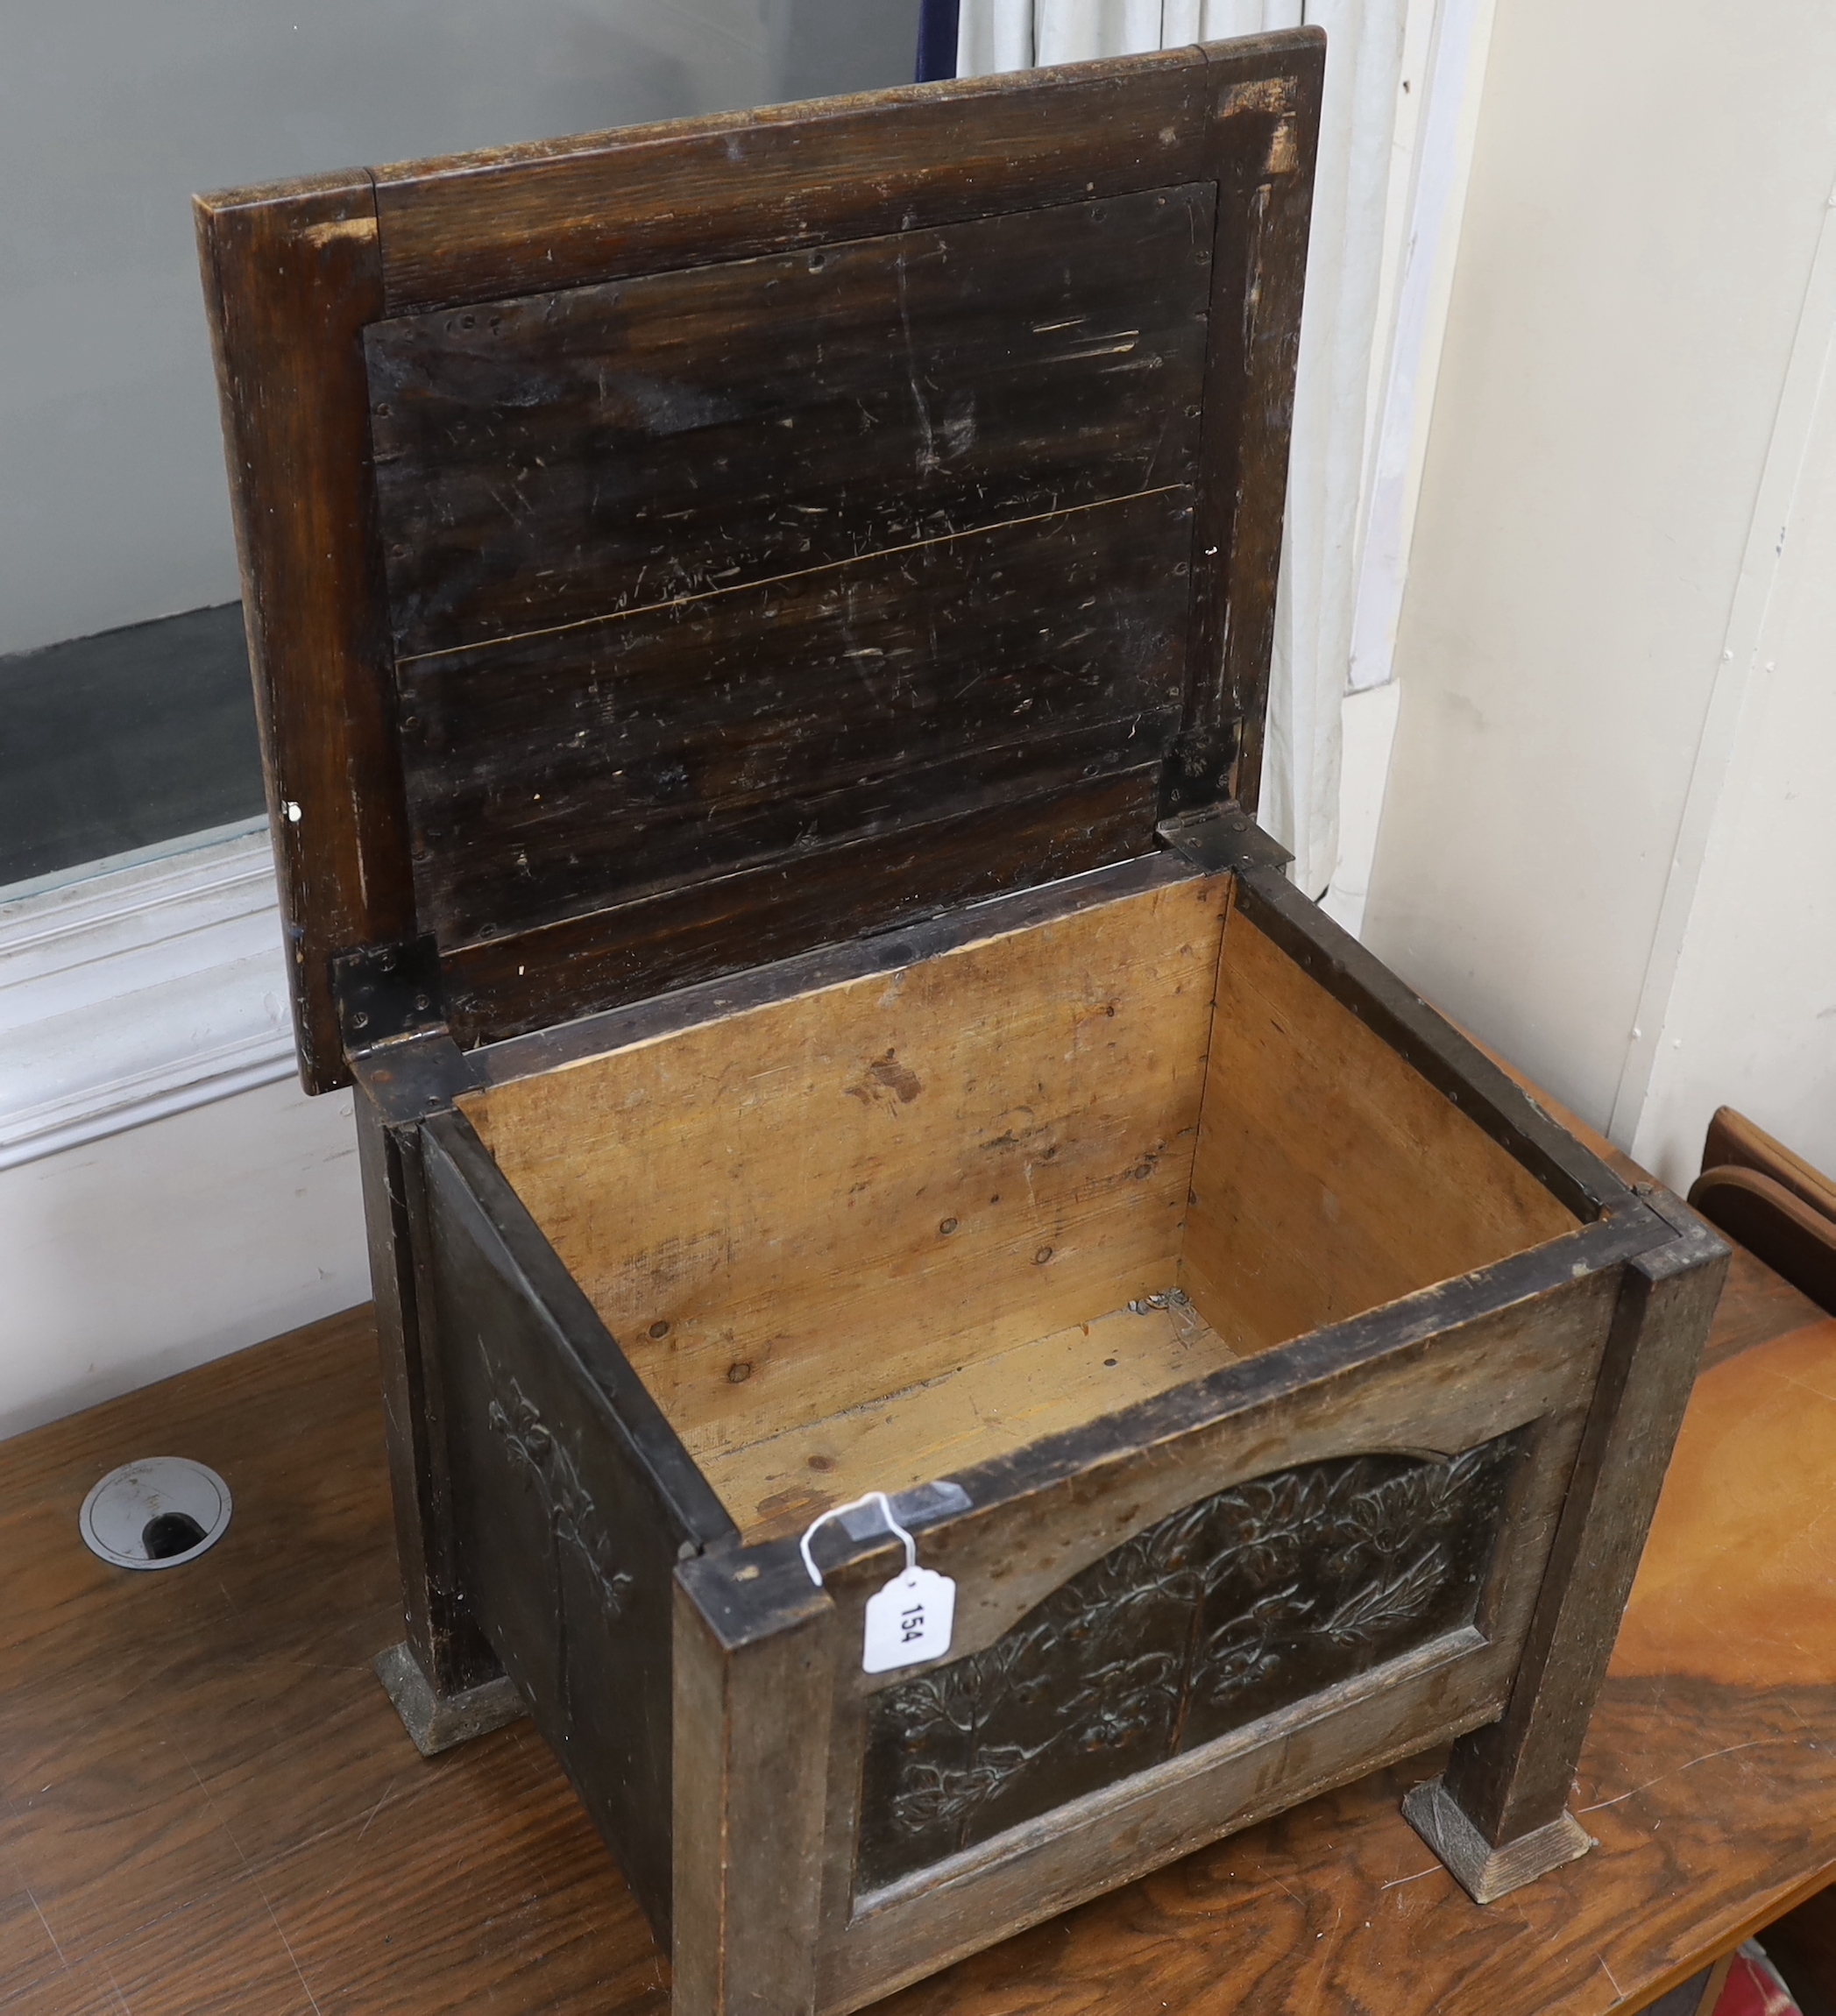 An Arts and Crafts oak and embossed copper coal box, width 54cm, depth 43cm, height 46cm